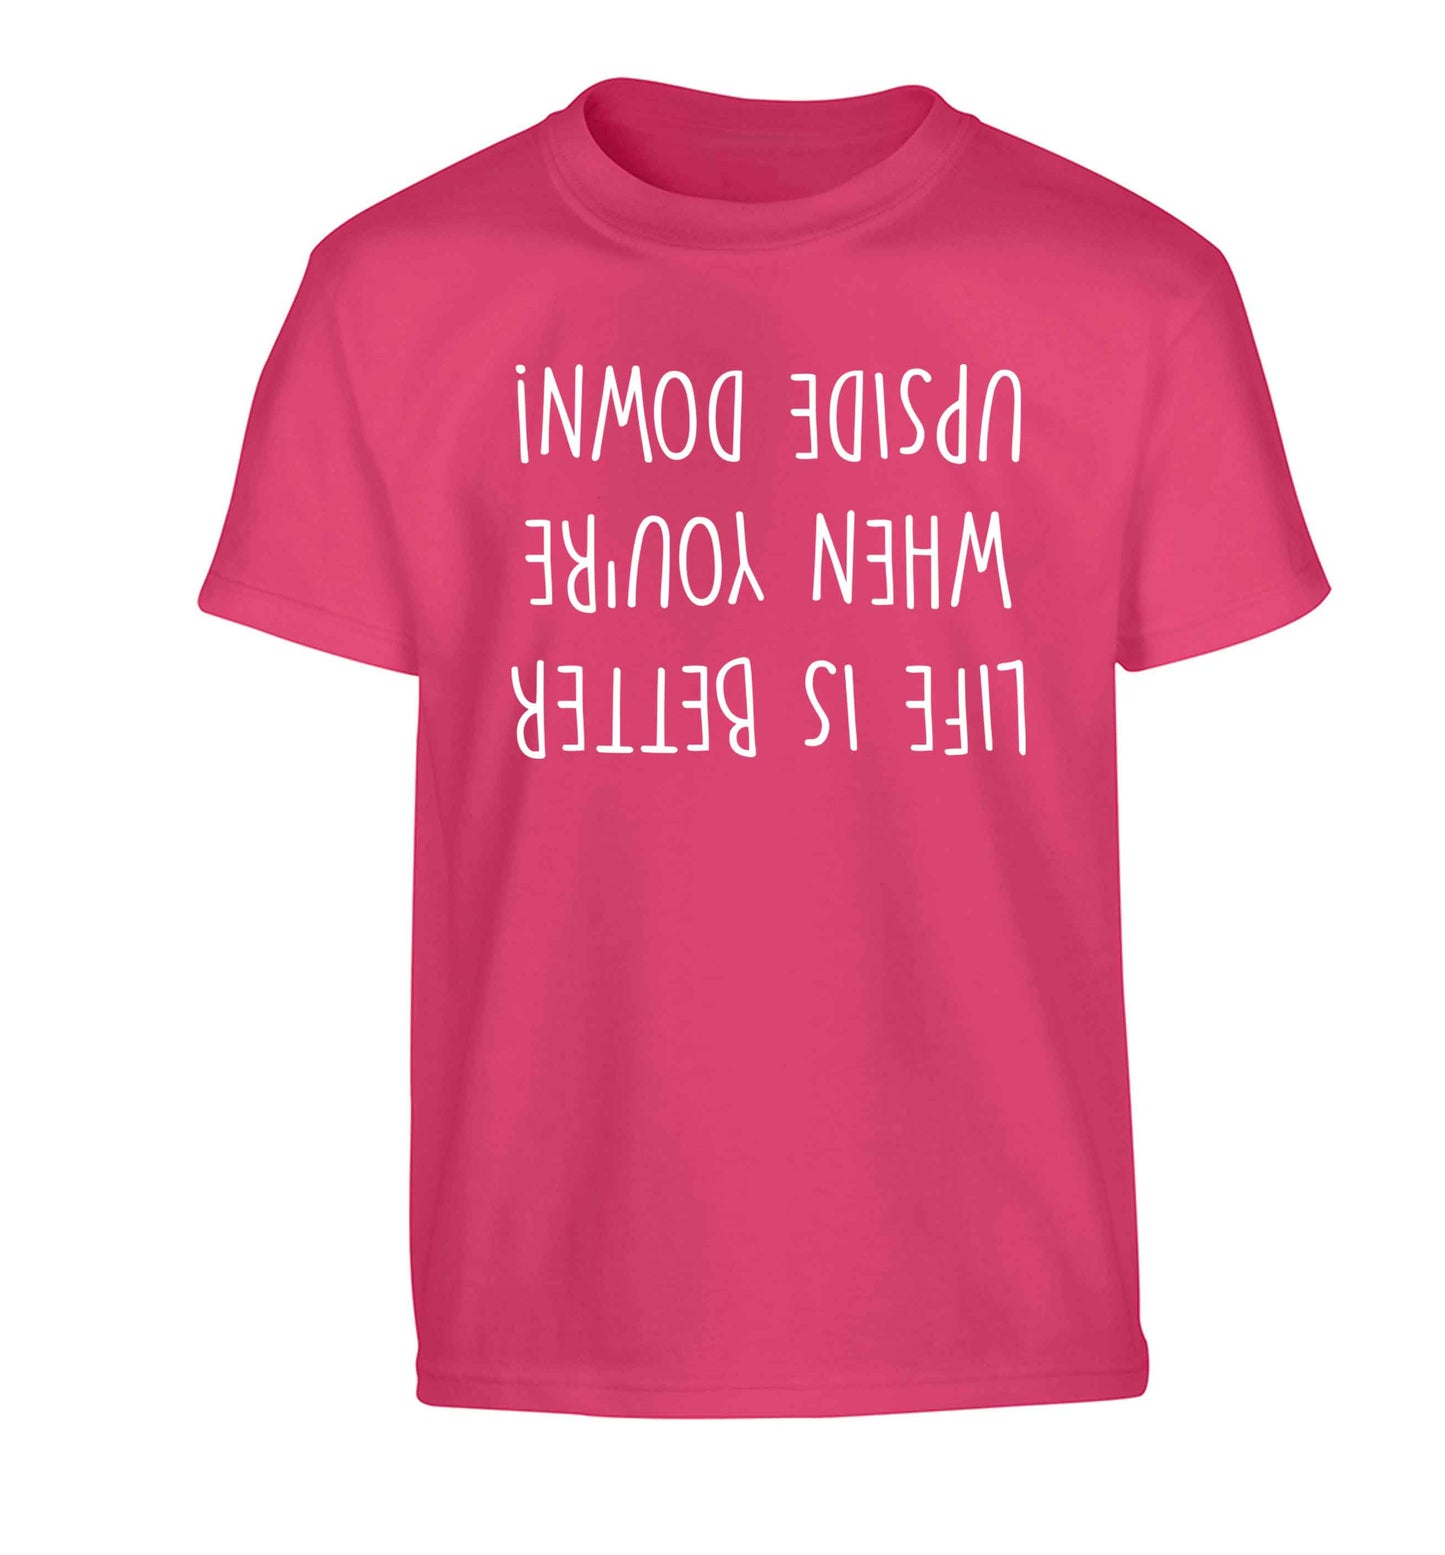 Life is better upside down Children's pink Tshirt 12-13 Years